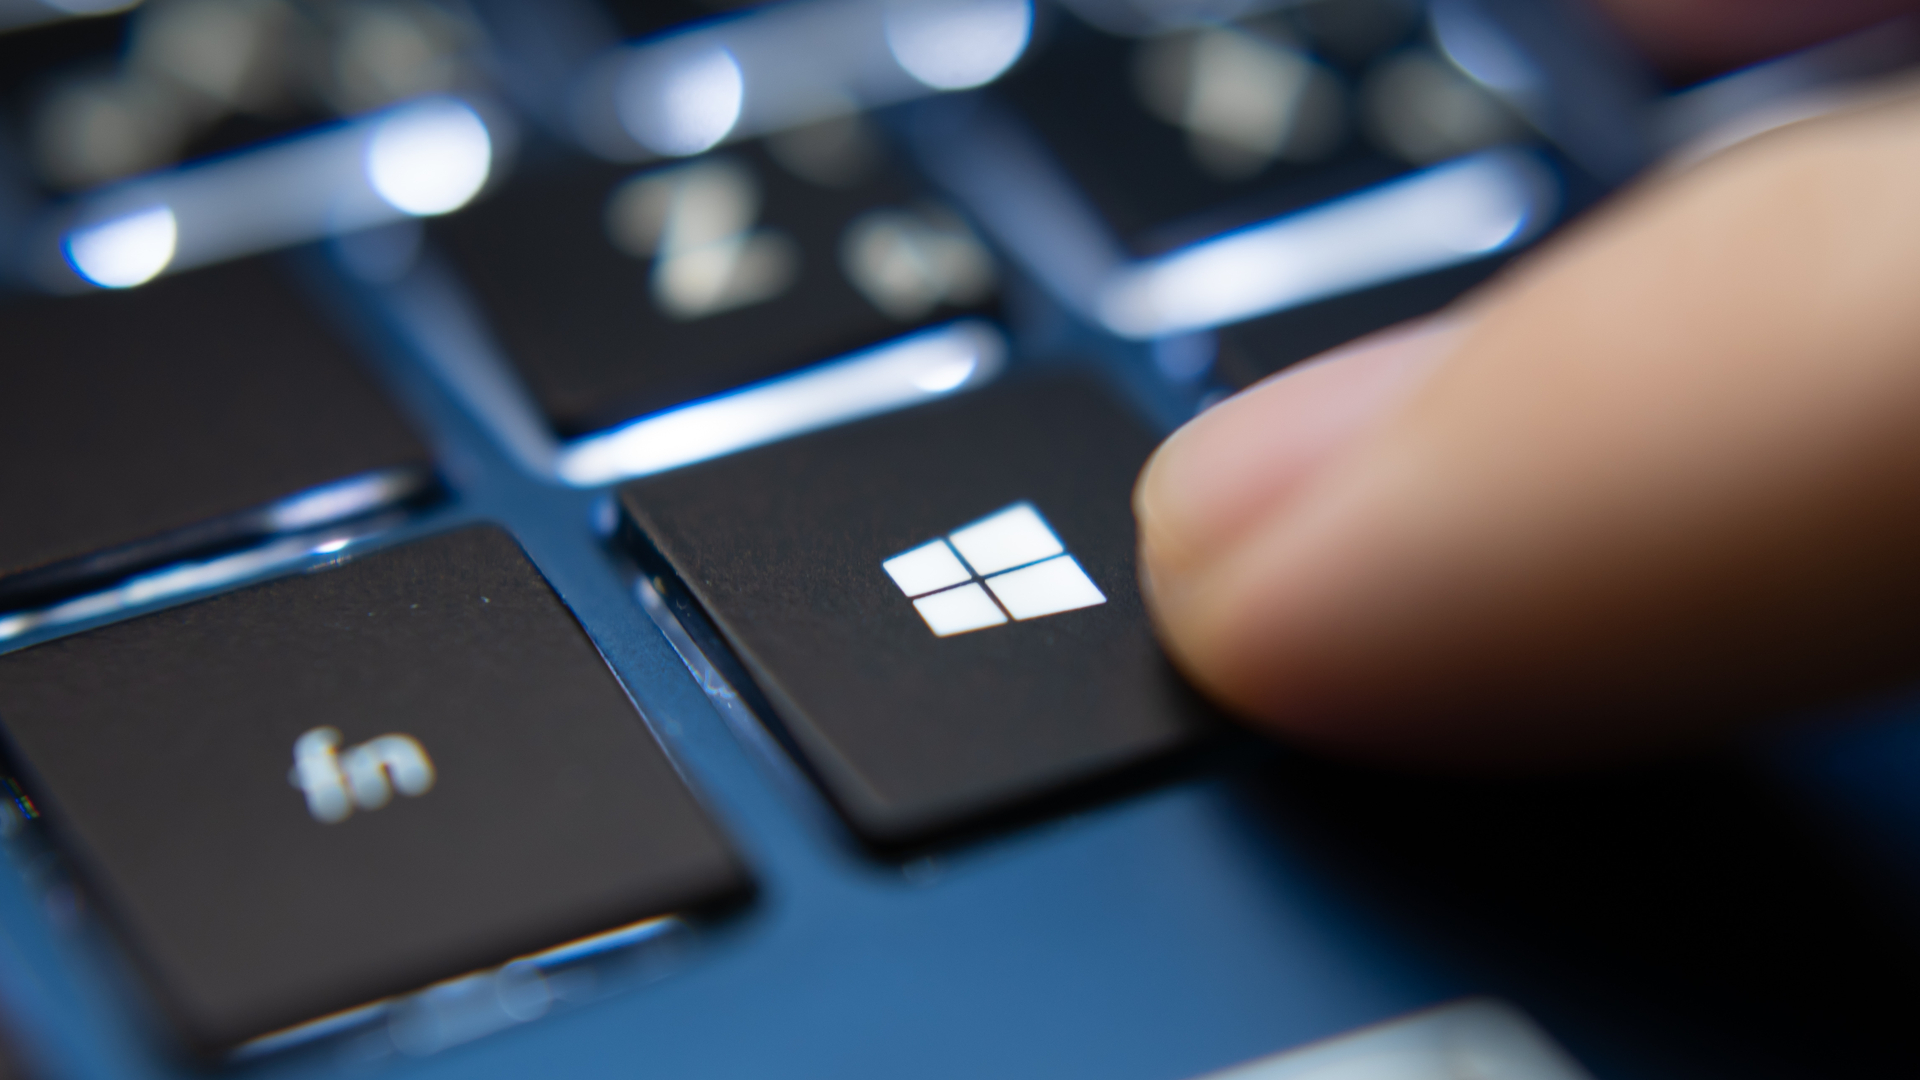 How to Switch Between Windows 10 User Accounts the Easy Way